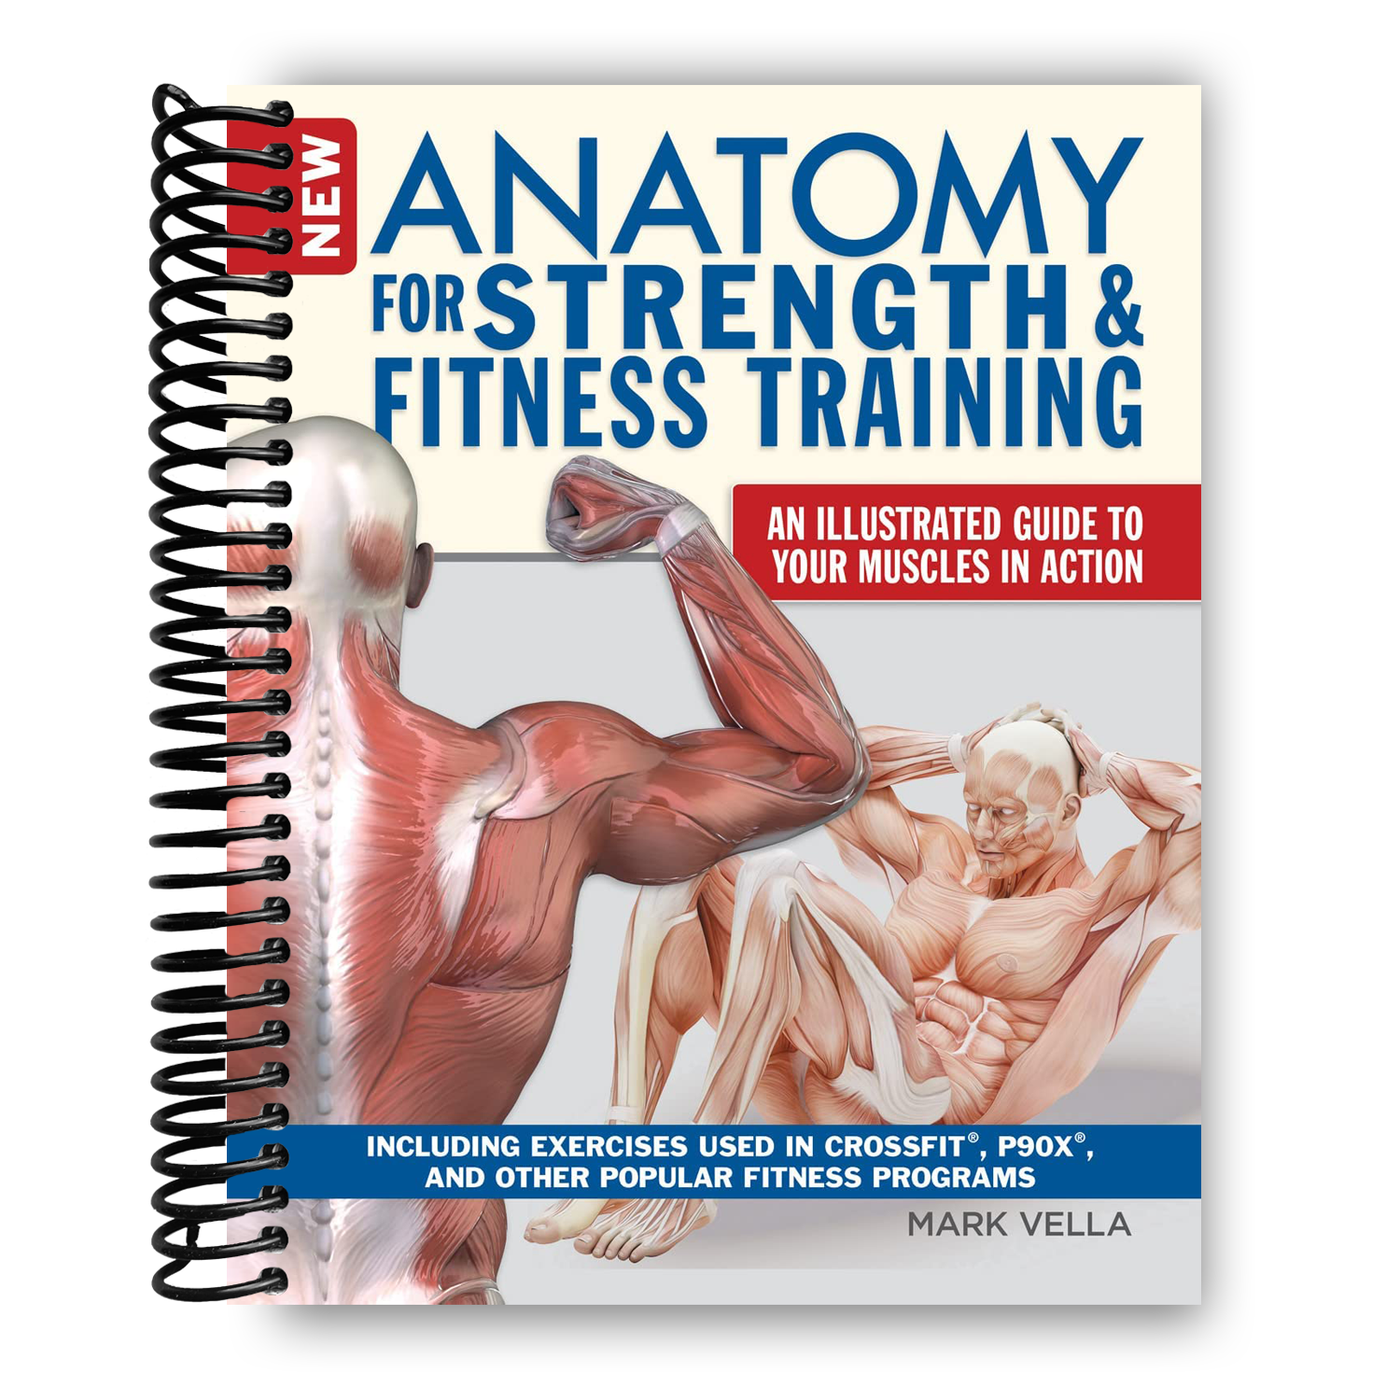 New Anatomy for Strength & Fitness Training: An Illustrated Guide to Your Muscles in Action Including Exercises Used in CrossFit (R), P90X (R), and Other Popular Fitness Programs (IMM Lifestyle Books) (Spiral-bound)